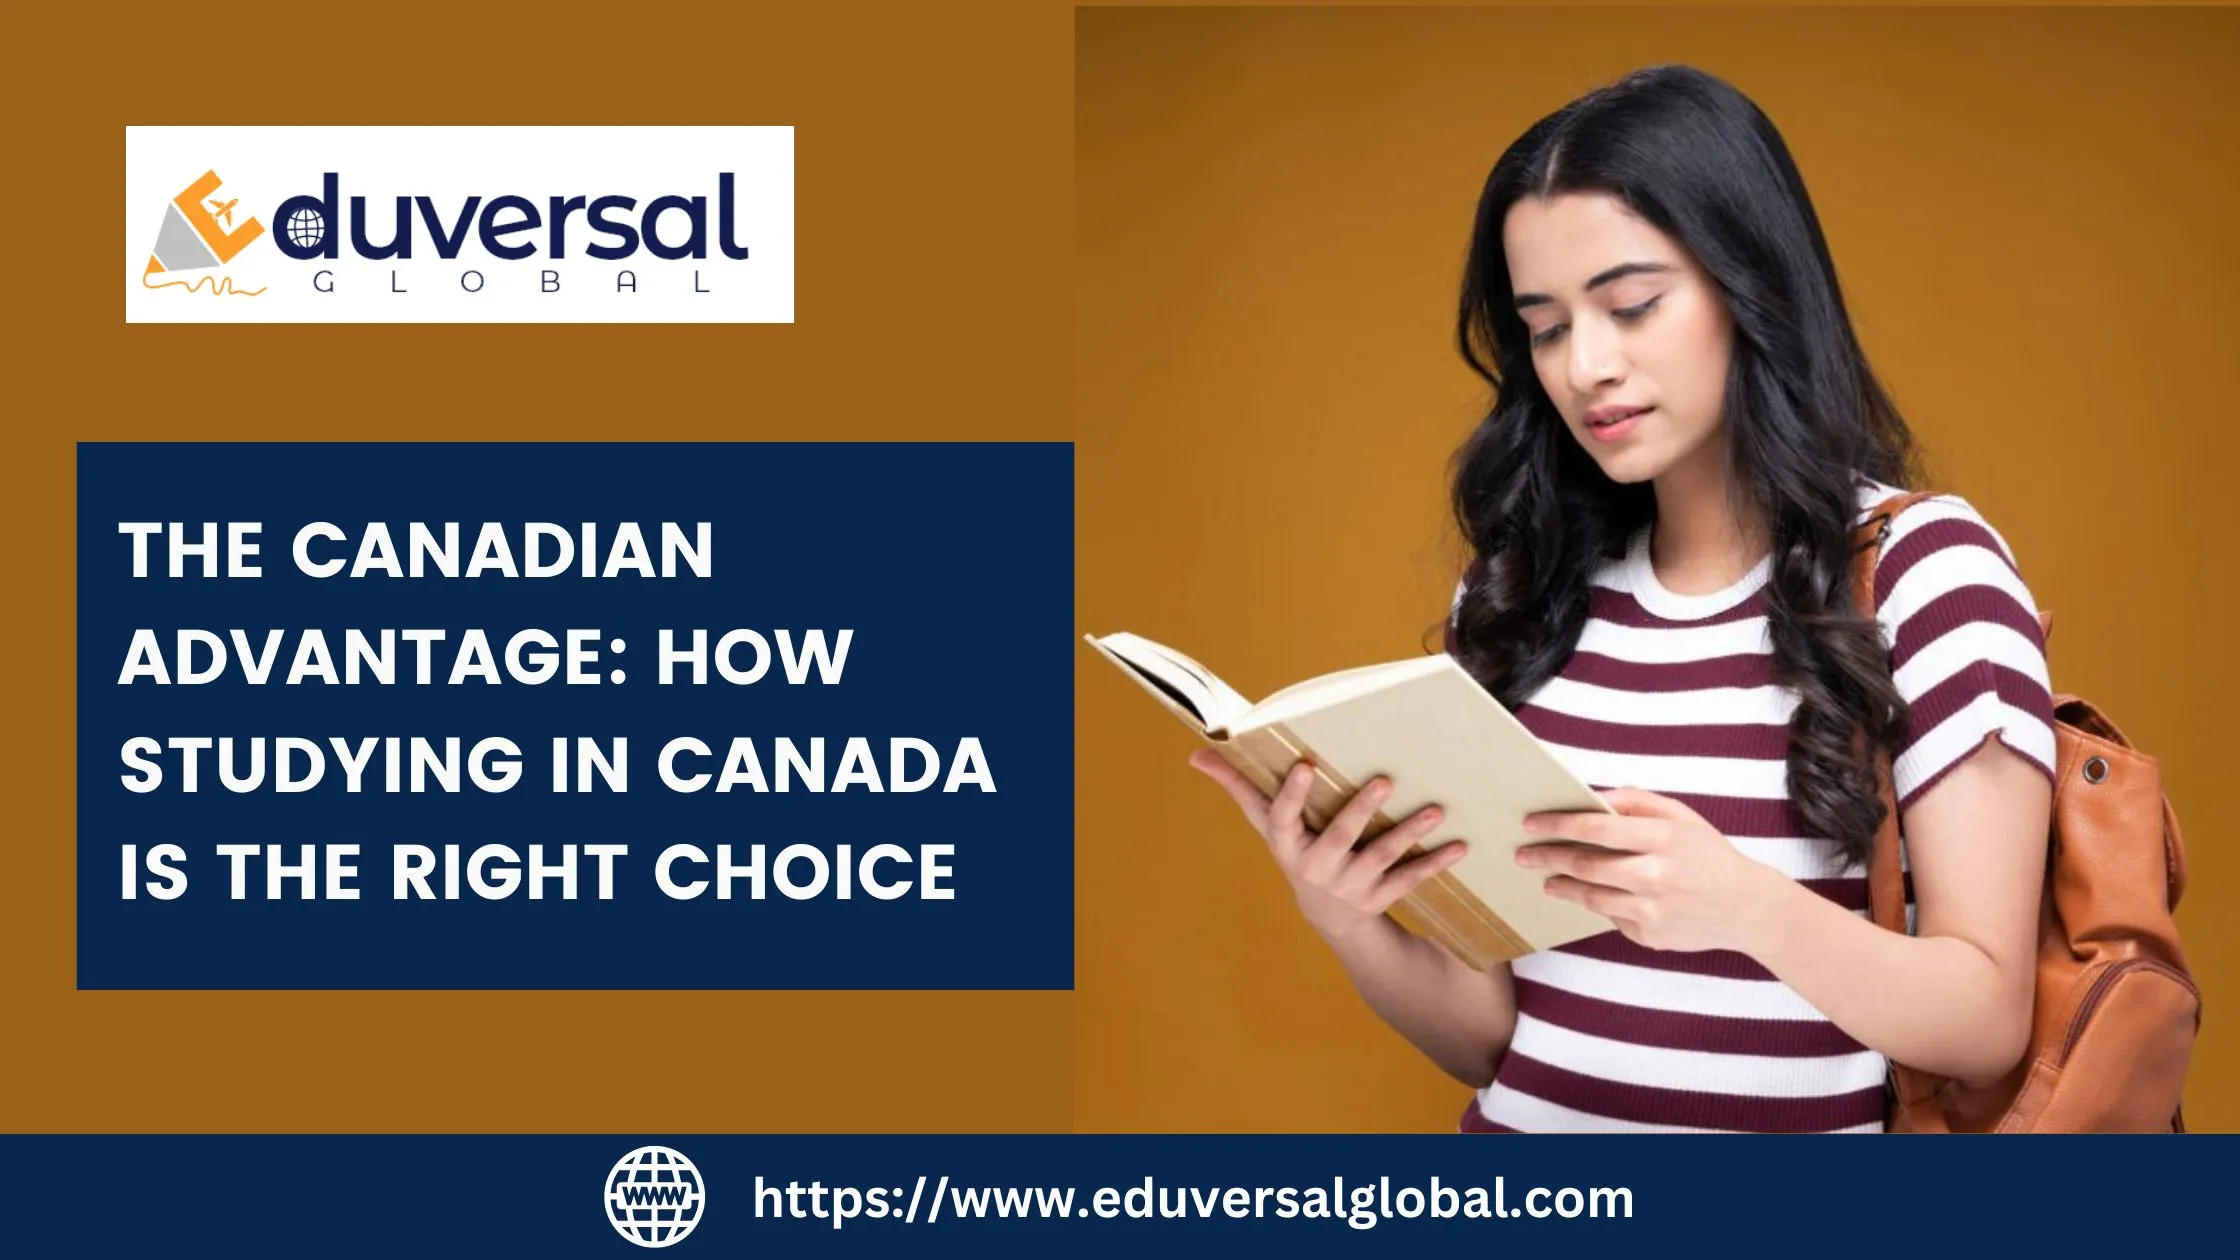 https://www.eduversalglobal.com/The Canadian Advantage: How Studying in Canada is the Right Choice